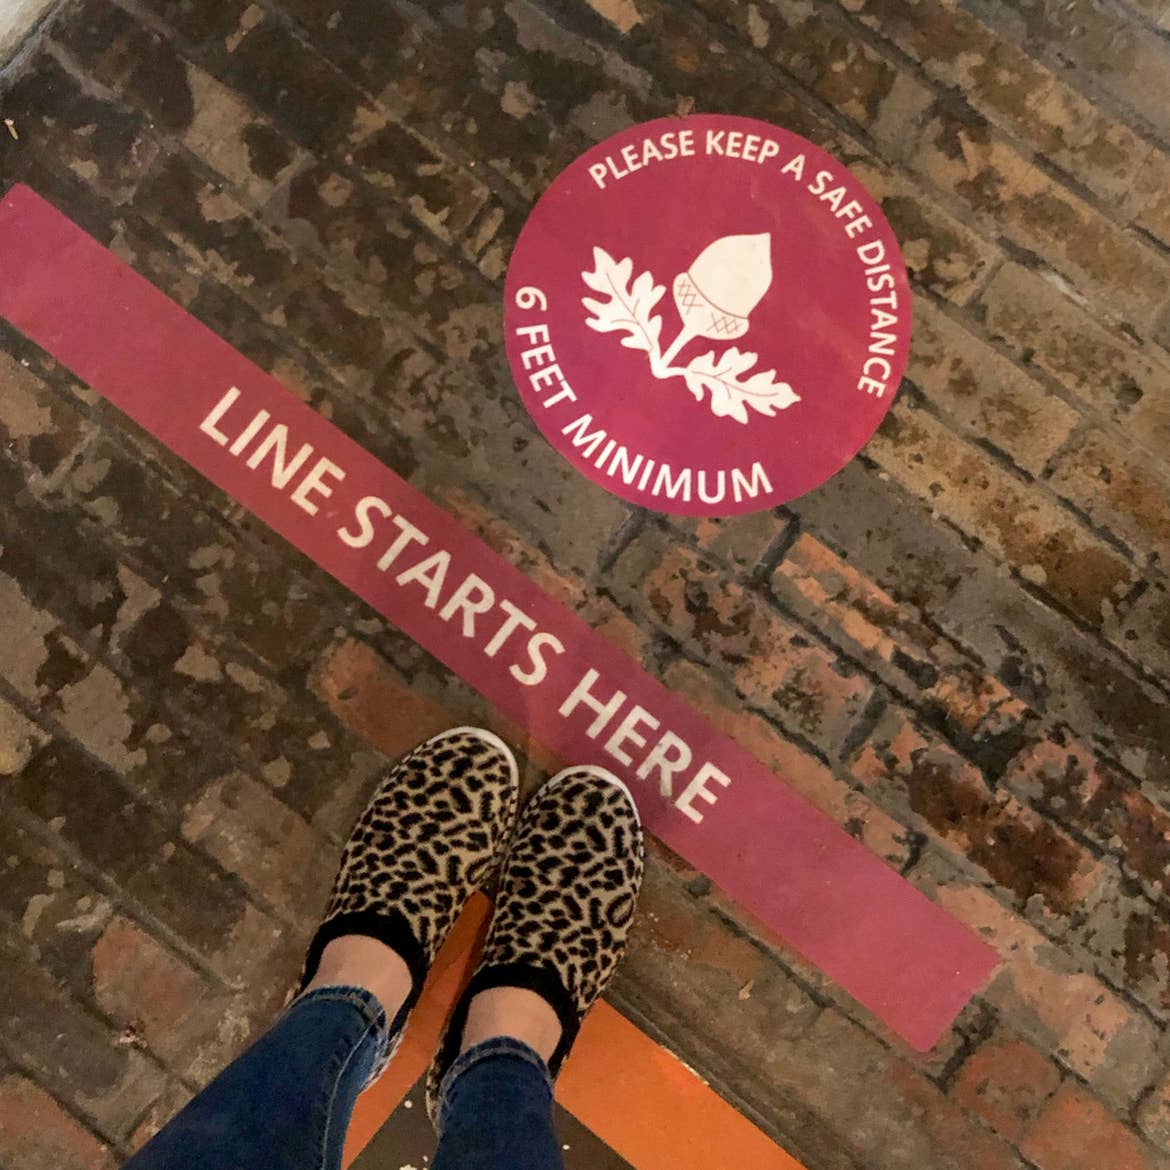 A brick-paved floor of the Biltmore Estate with a sign indicating Safety Measures for Social Distancing that reads, 'Line starts here, Please keep a safe distance, 6 Feet Minimum.'